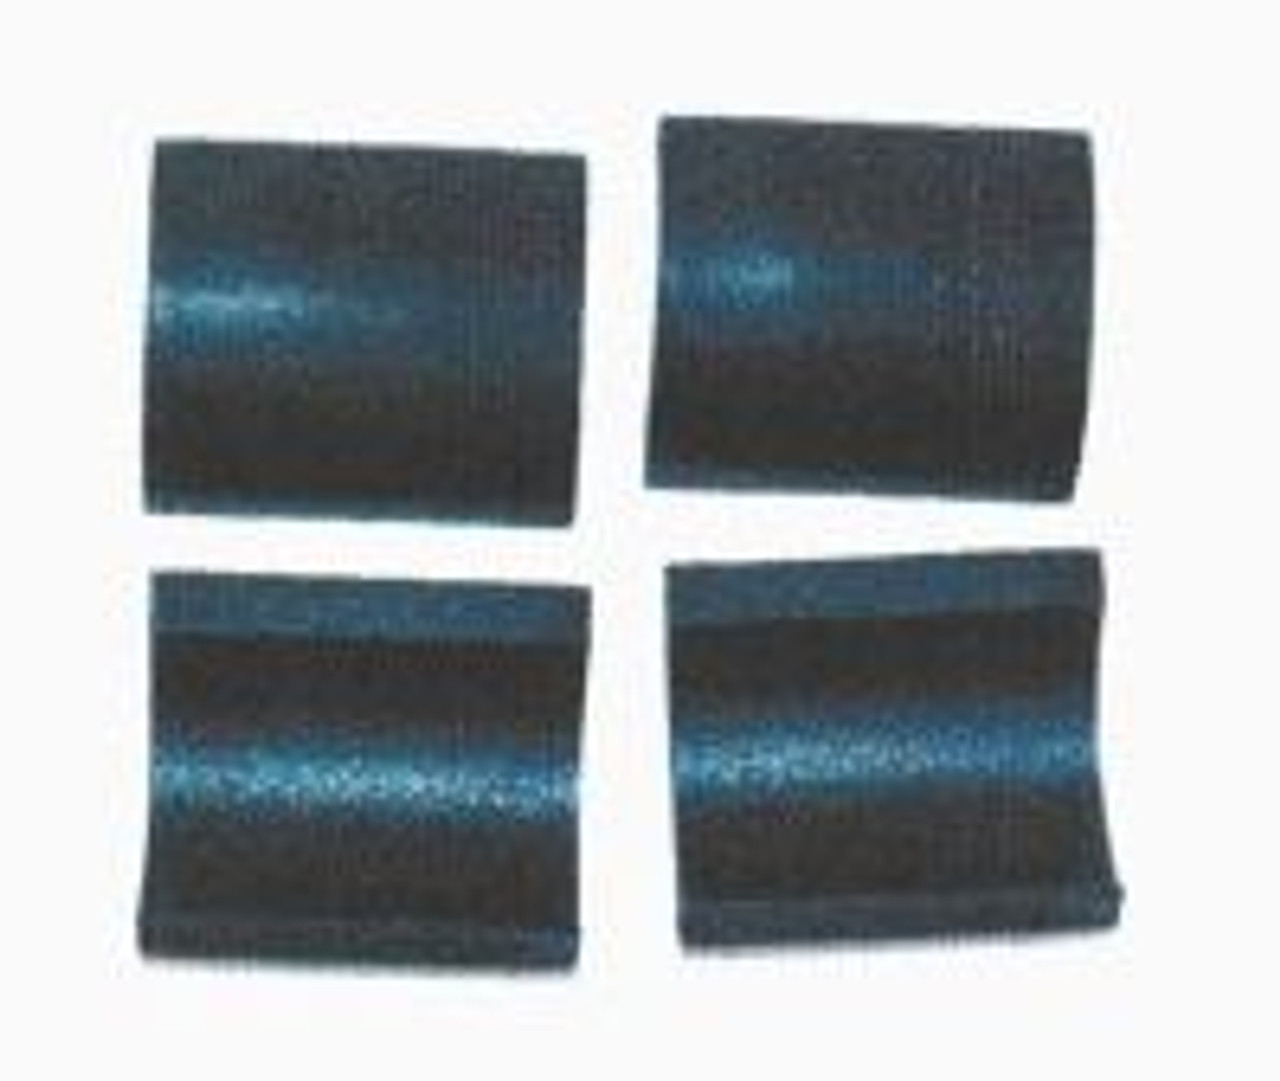 Rio Mobility Handcycle Clamp Shims for Firefly, Dragonfly or E-Dragonfly (pack of 4 shims) Next Gen 2.0